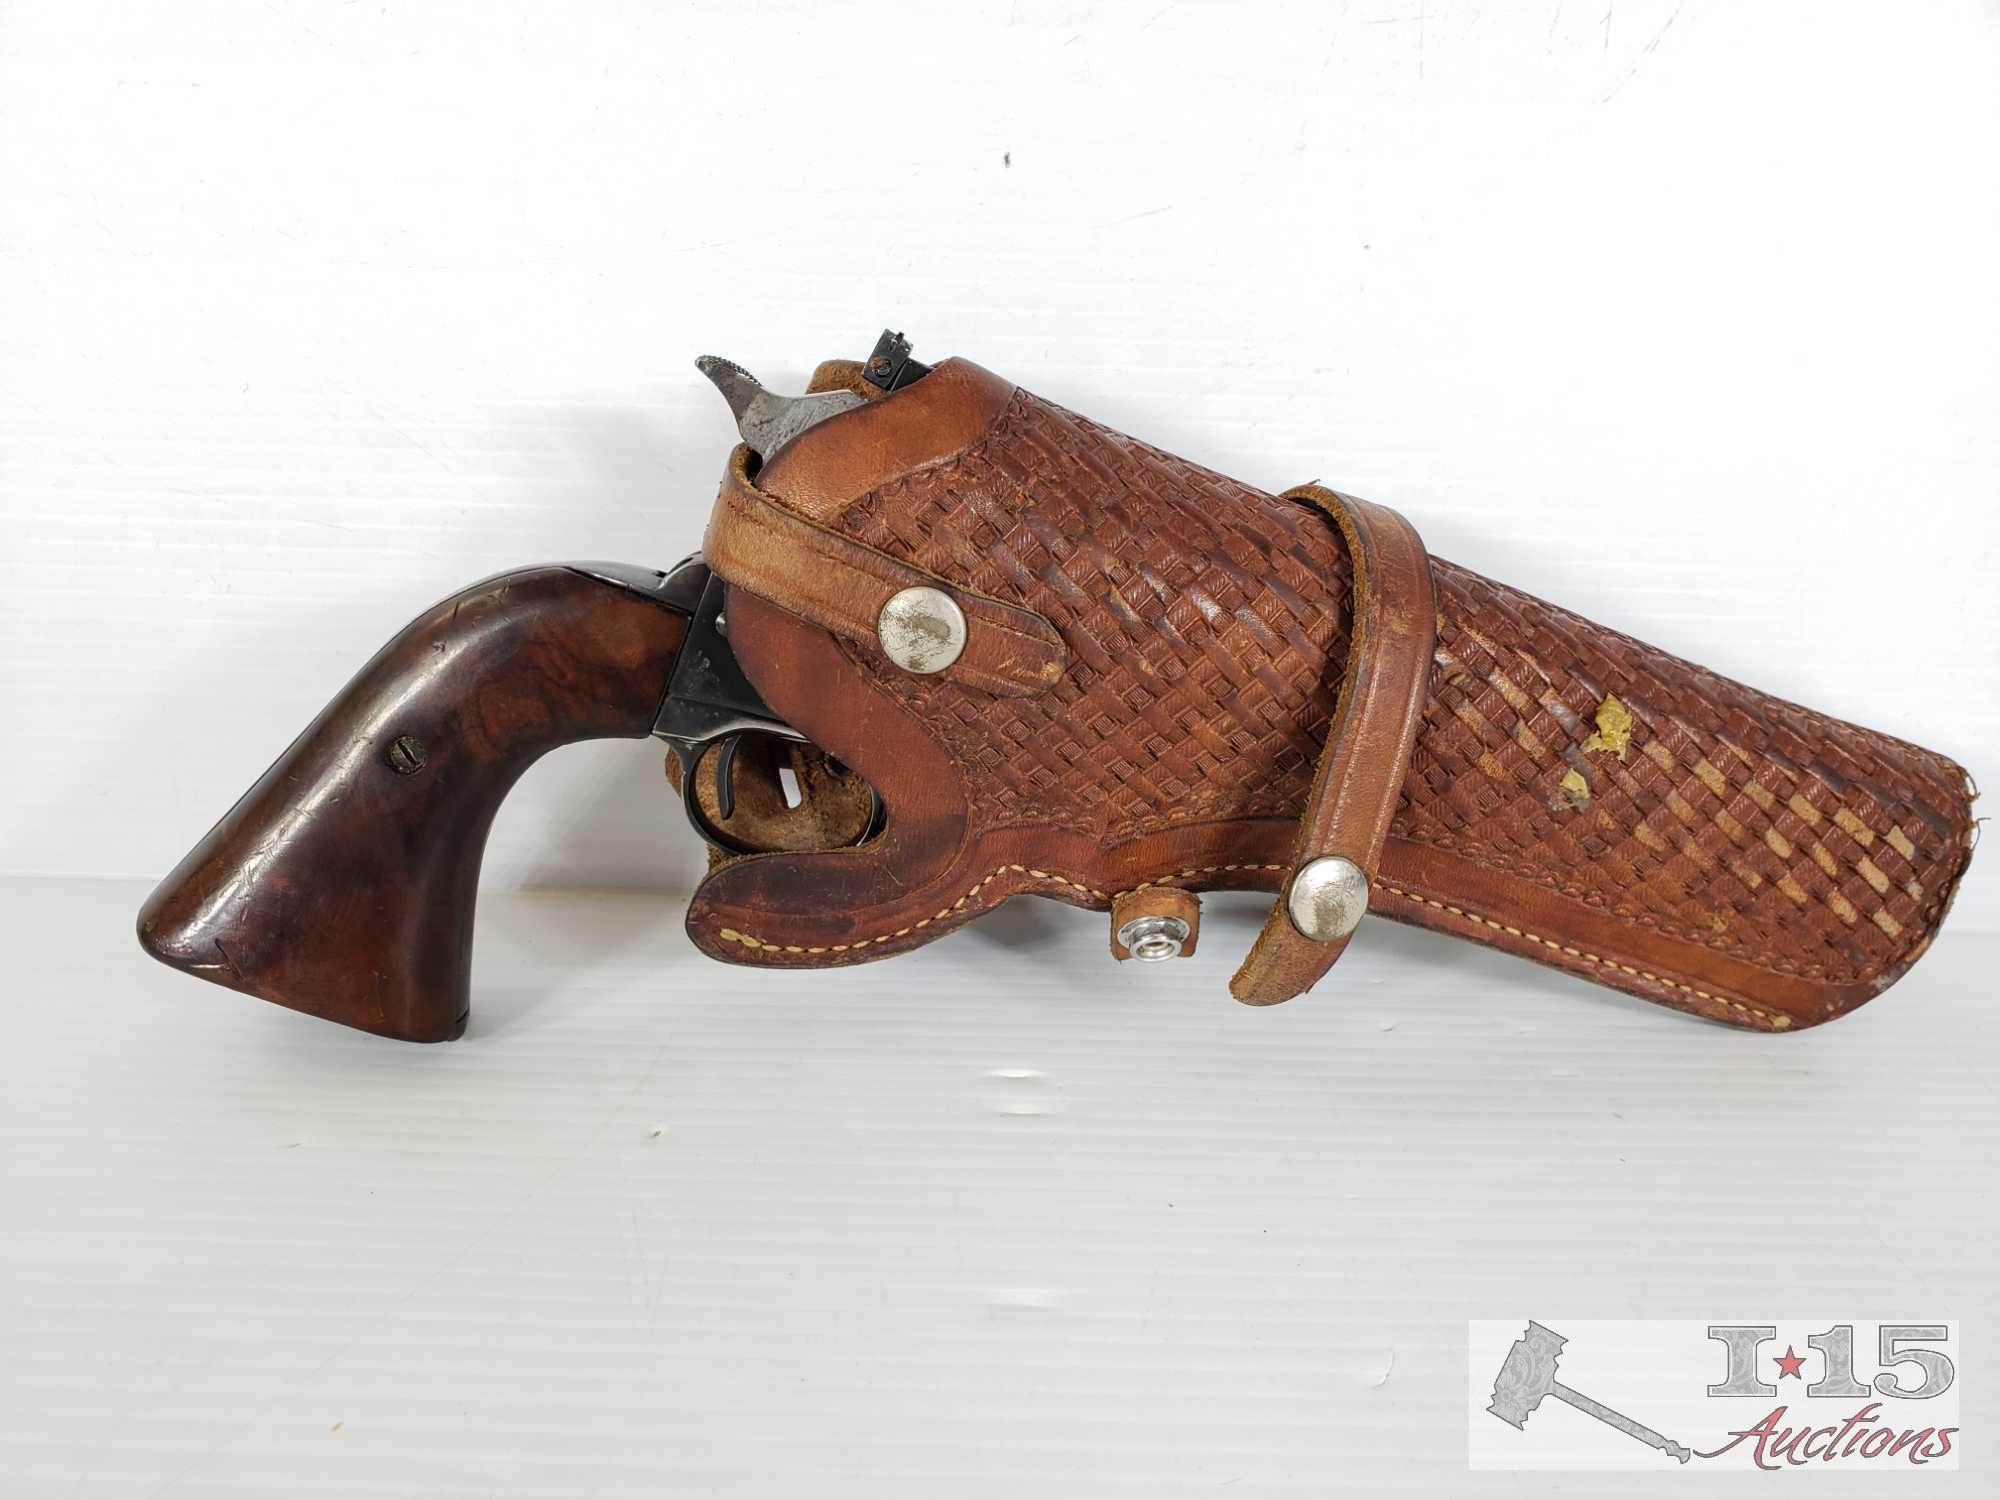 Herters .44 Calibre Revolver with Leather Holster